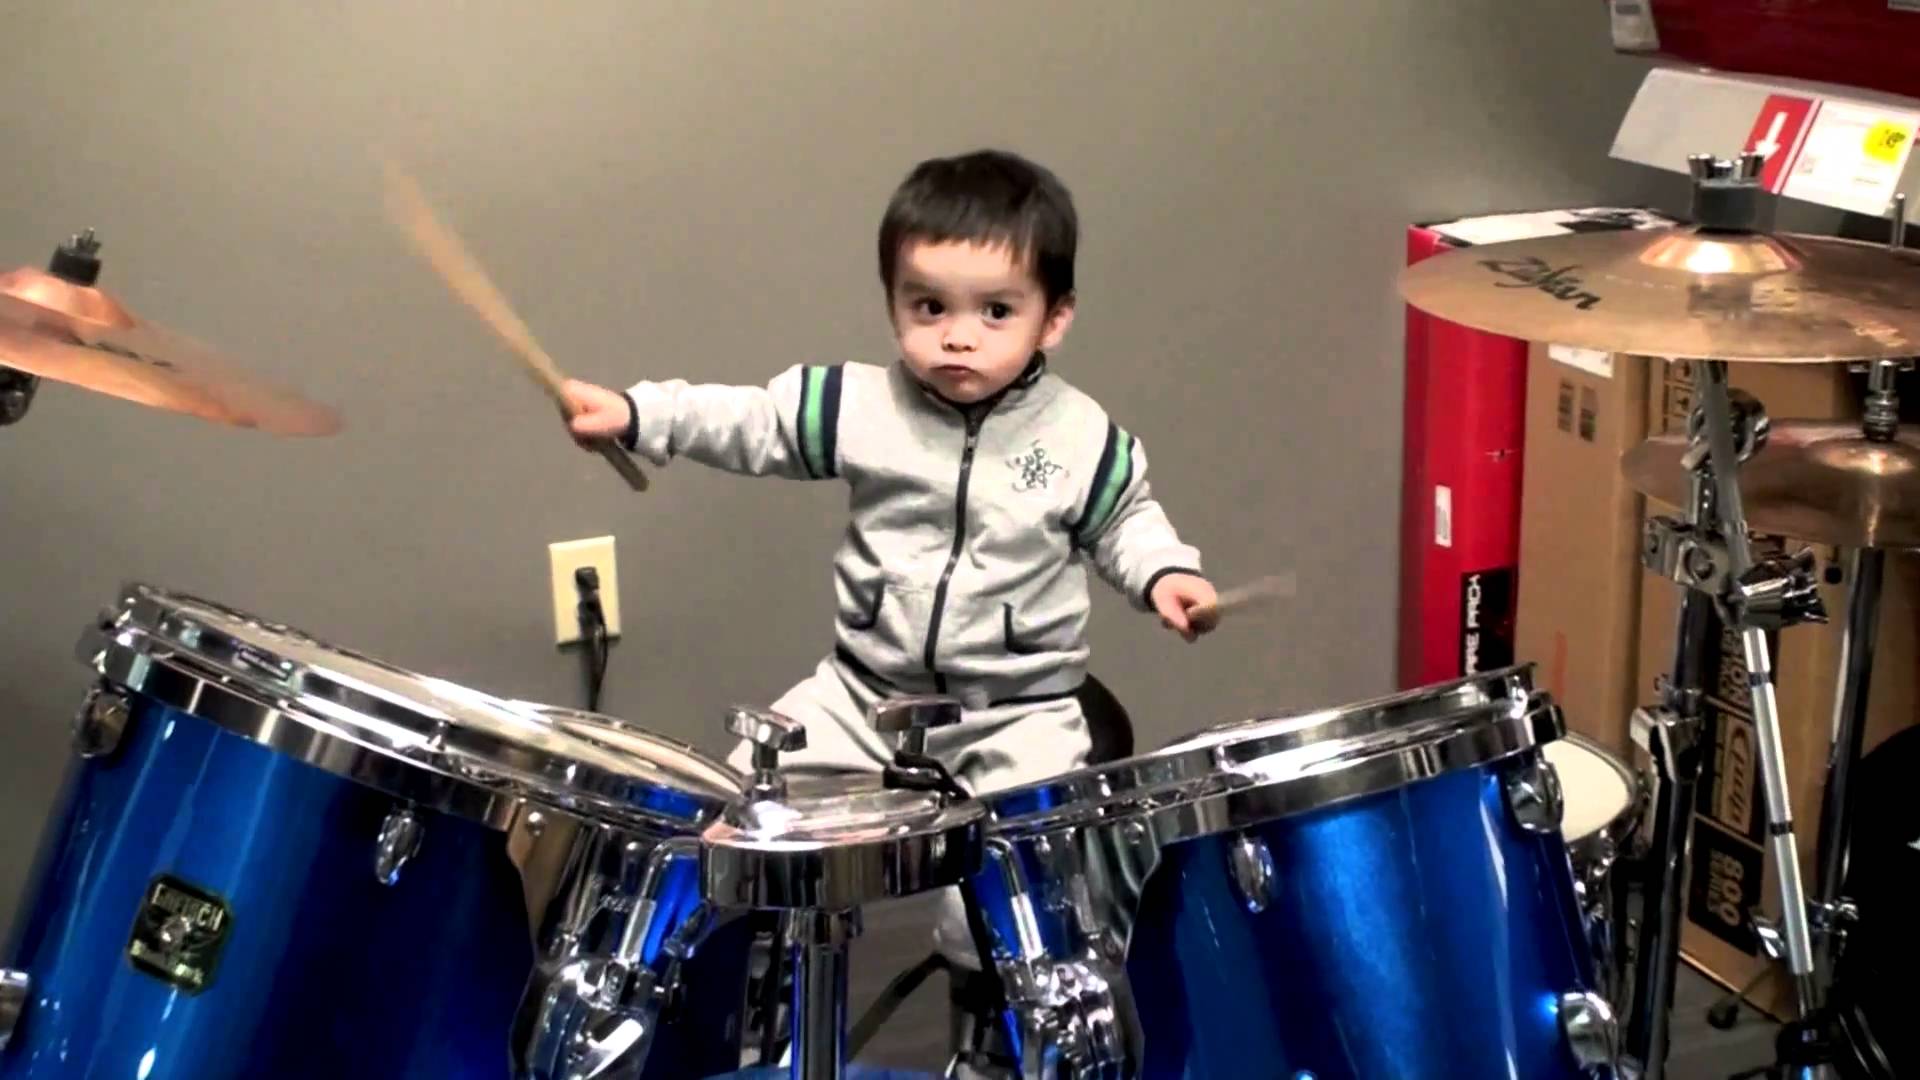 YOUNGEST DRUMMER IN THE WORLD - YouTube